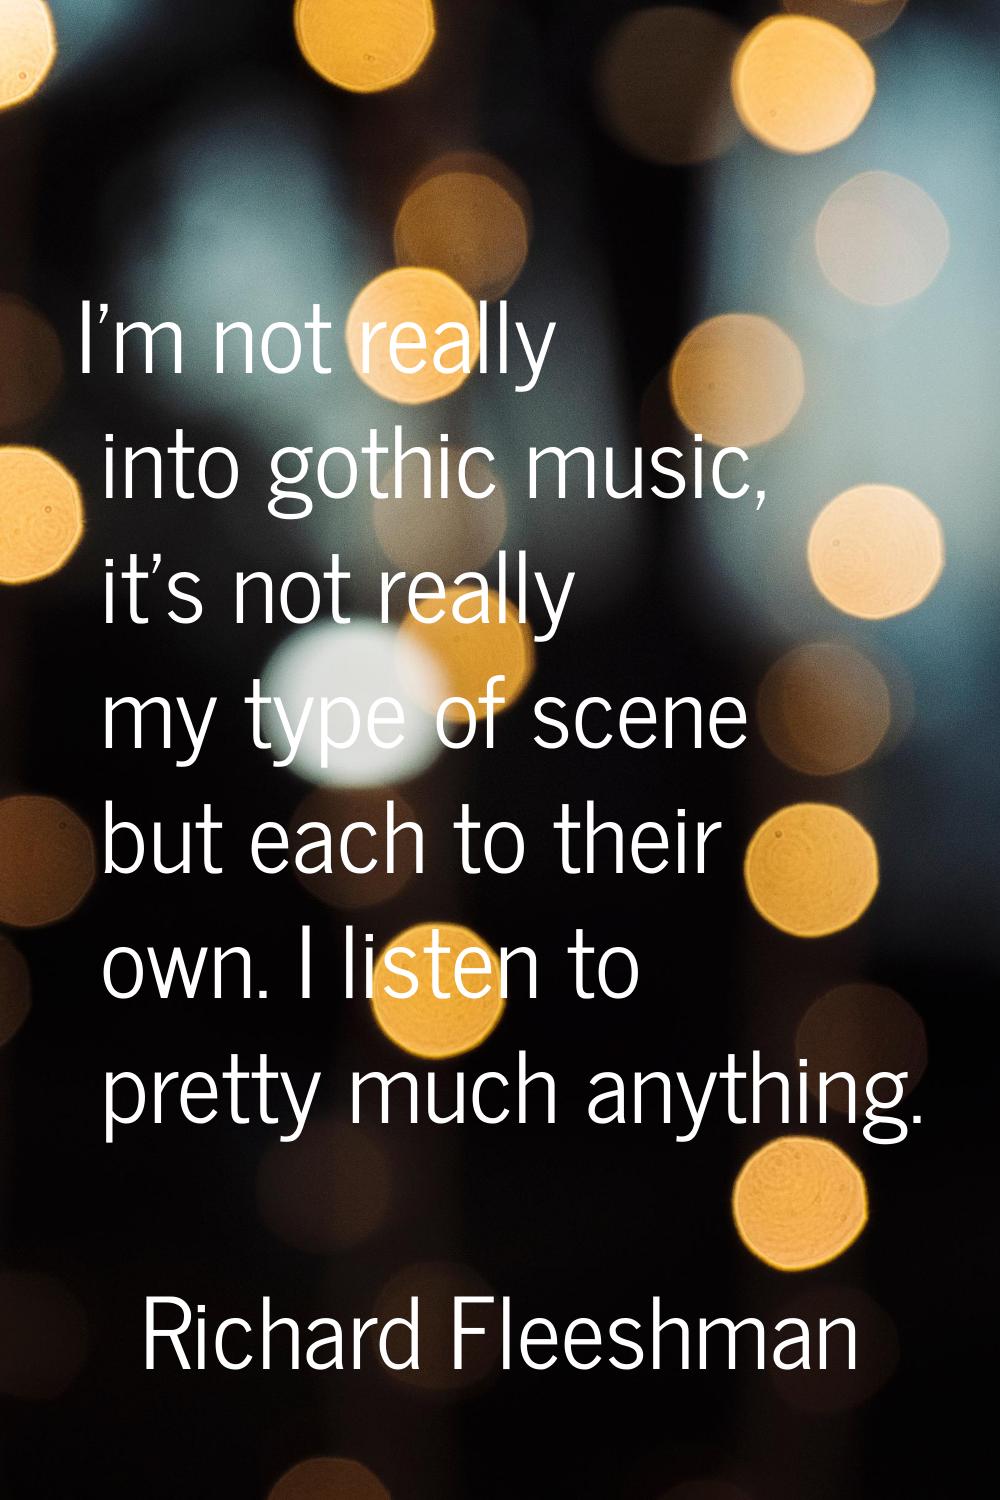 I'm not really into gothic music, it's not really my type of scene but each to their own. I listen 